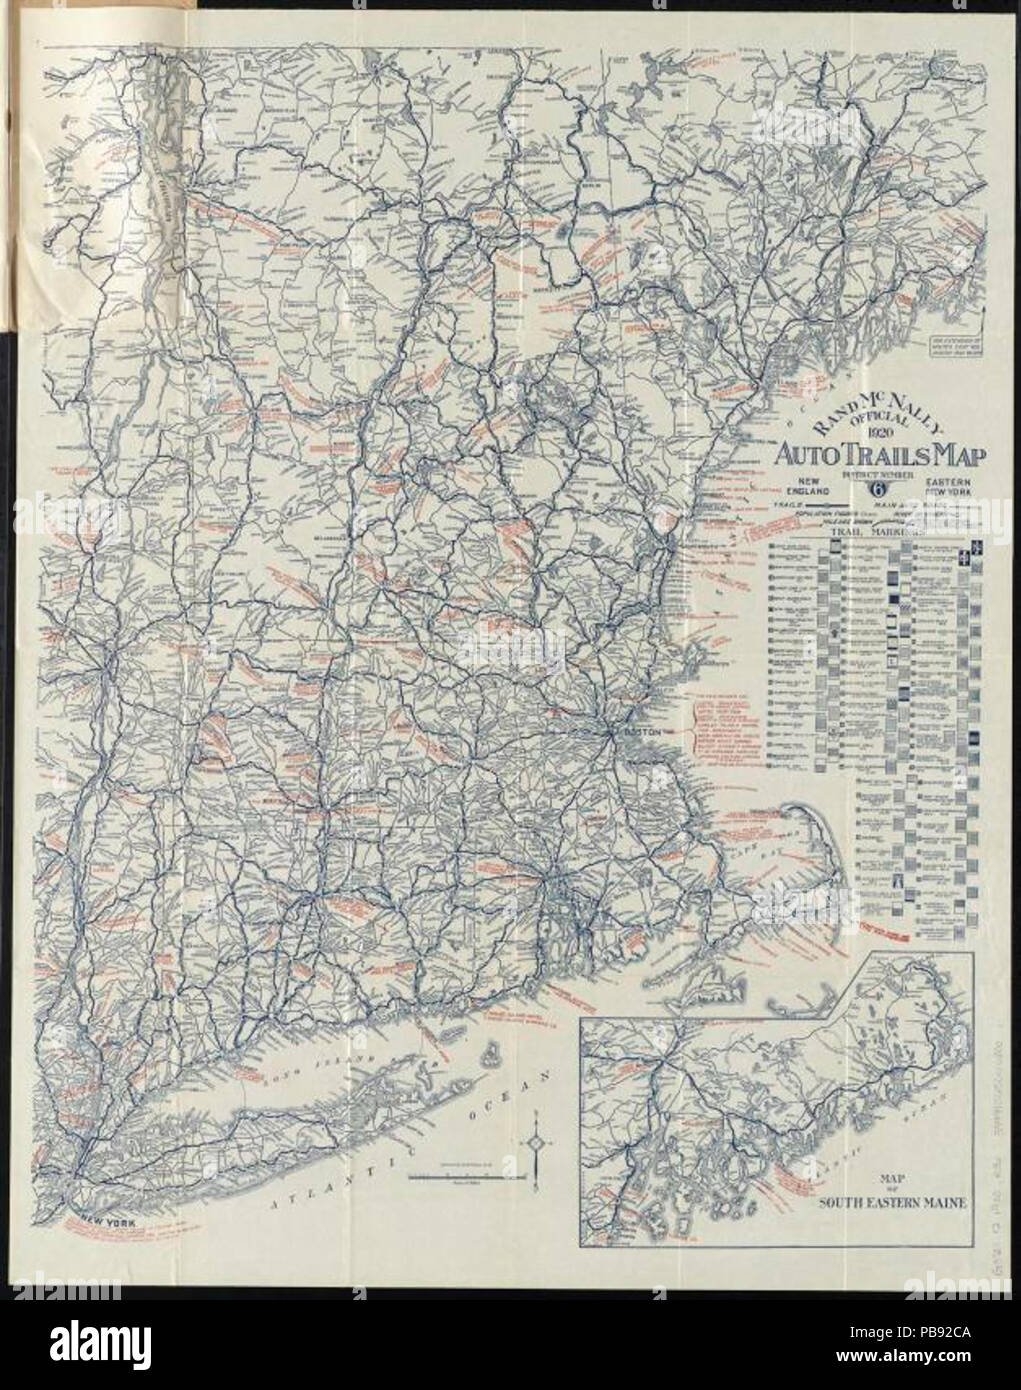 1245 Rand McNally official 1920 auto trails map - District number 6 - New England, eastern New York. (10144269403) Stock Photo